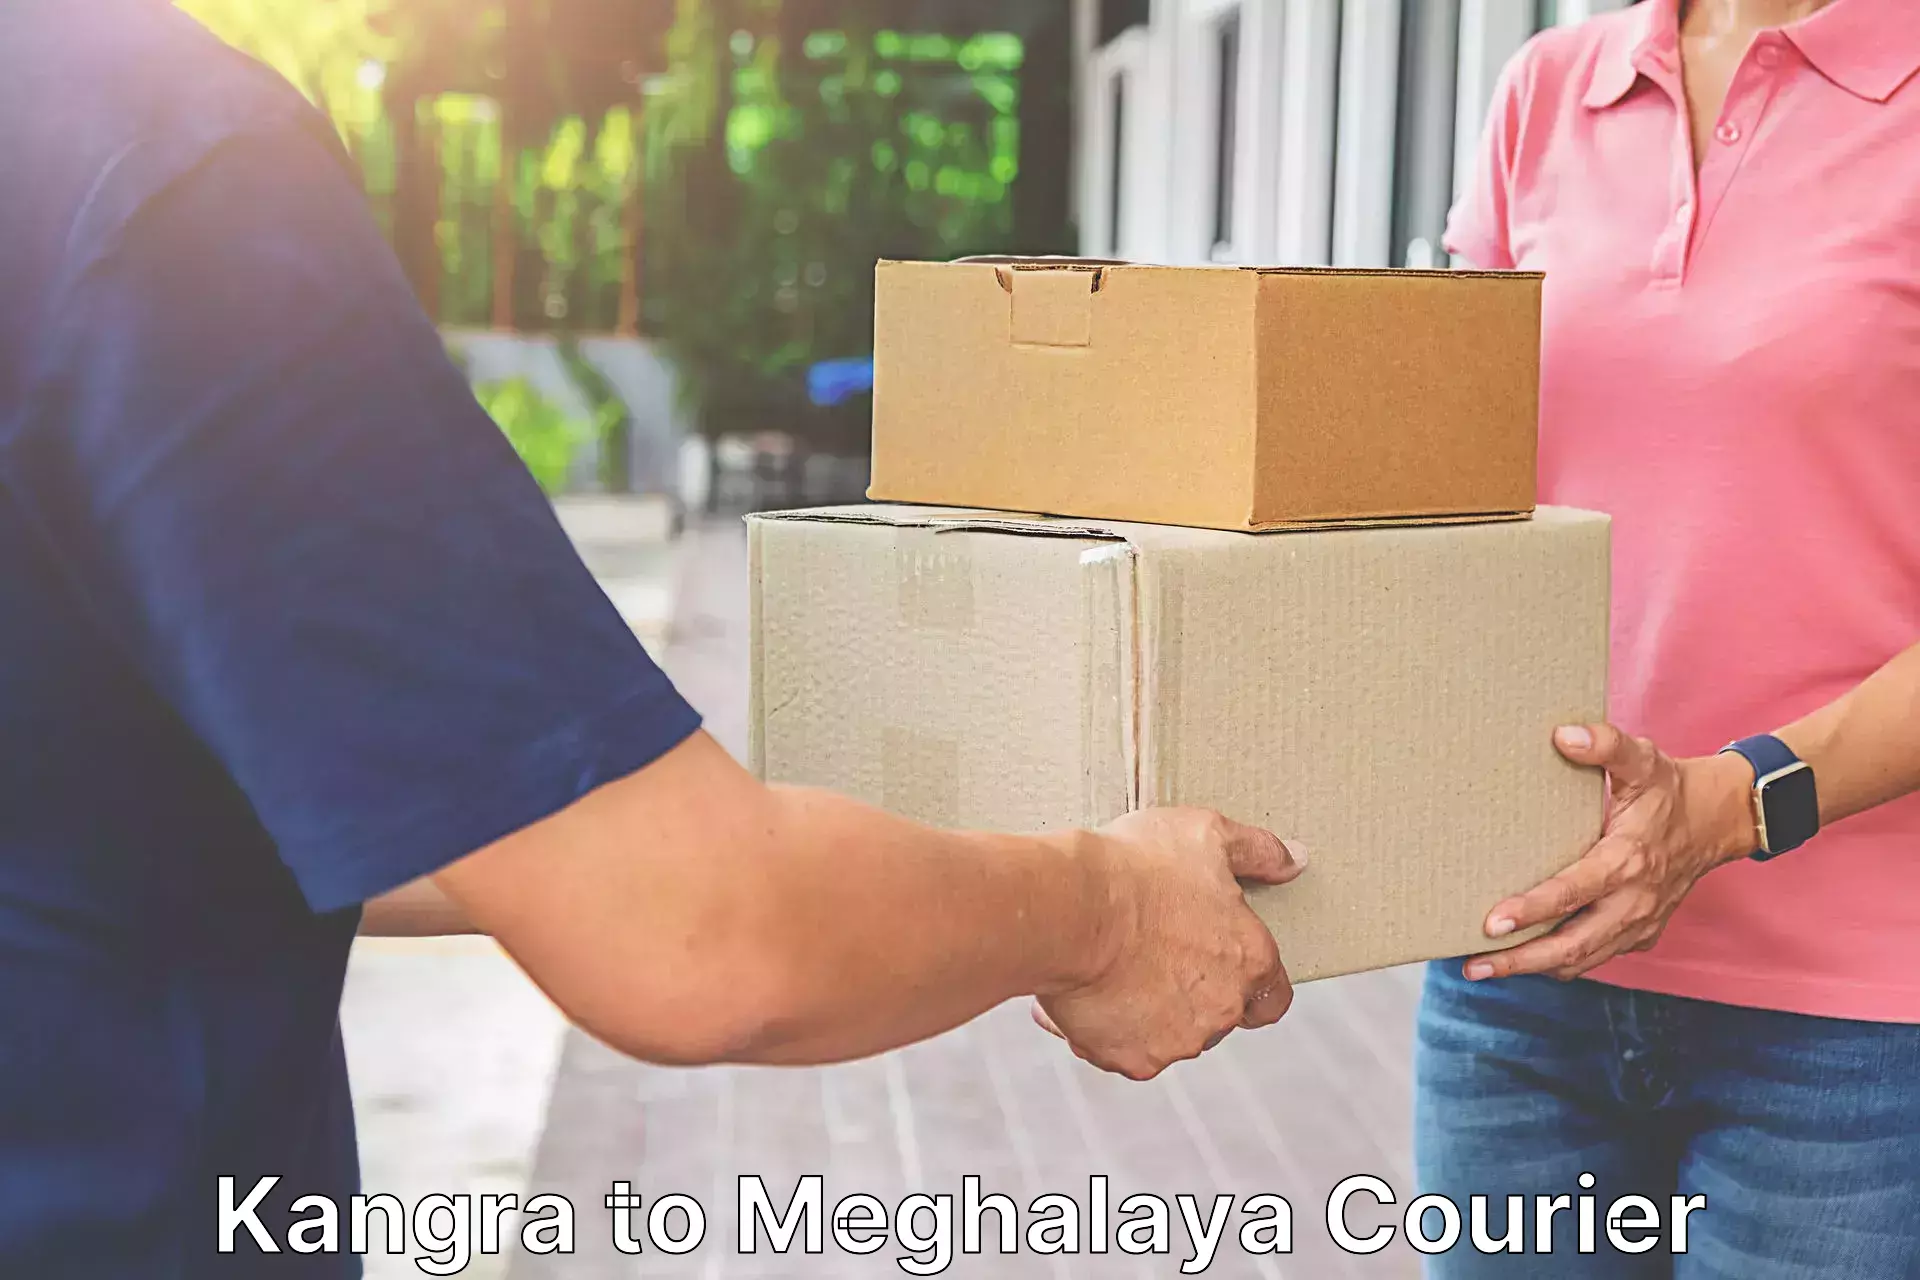 State-of-the-art courier technology Kangra to Meghalaya